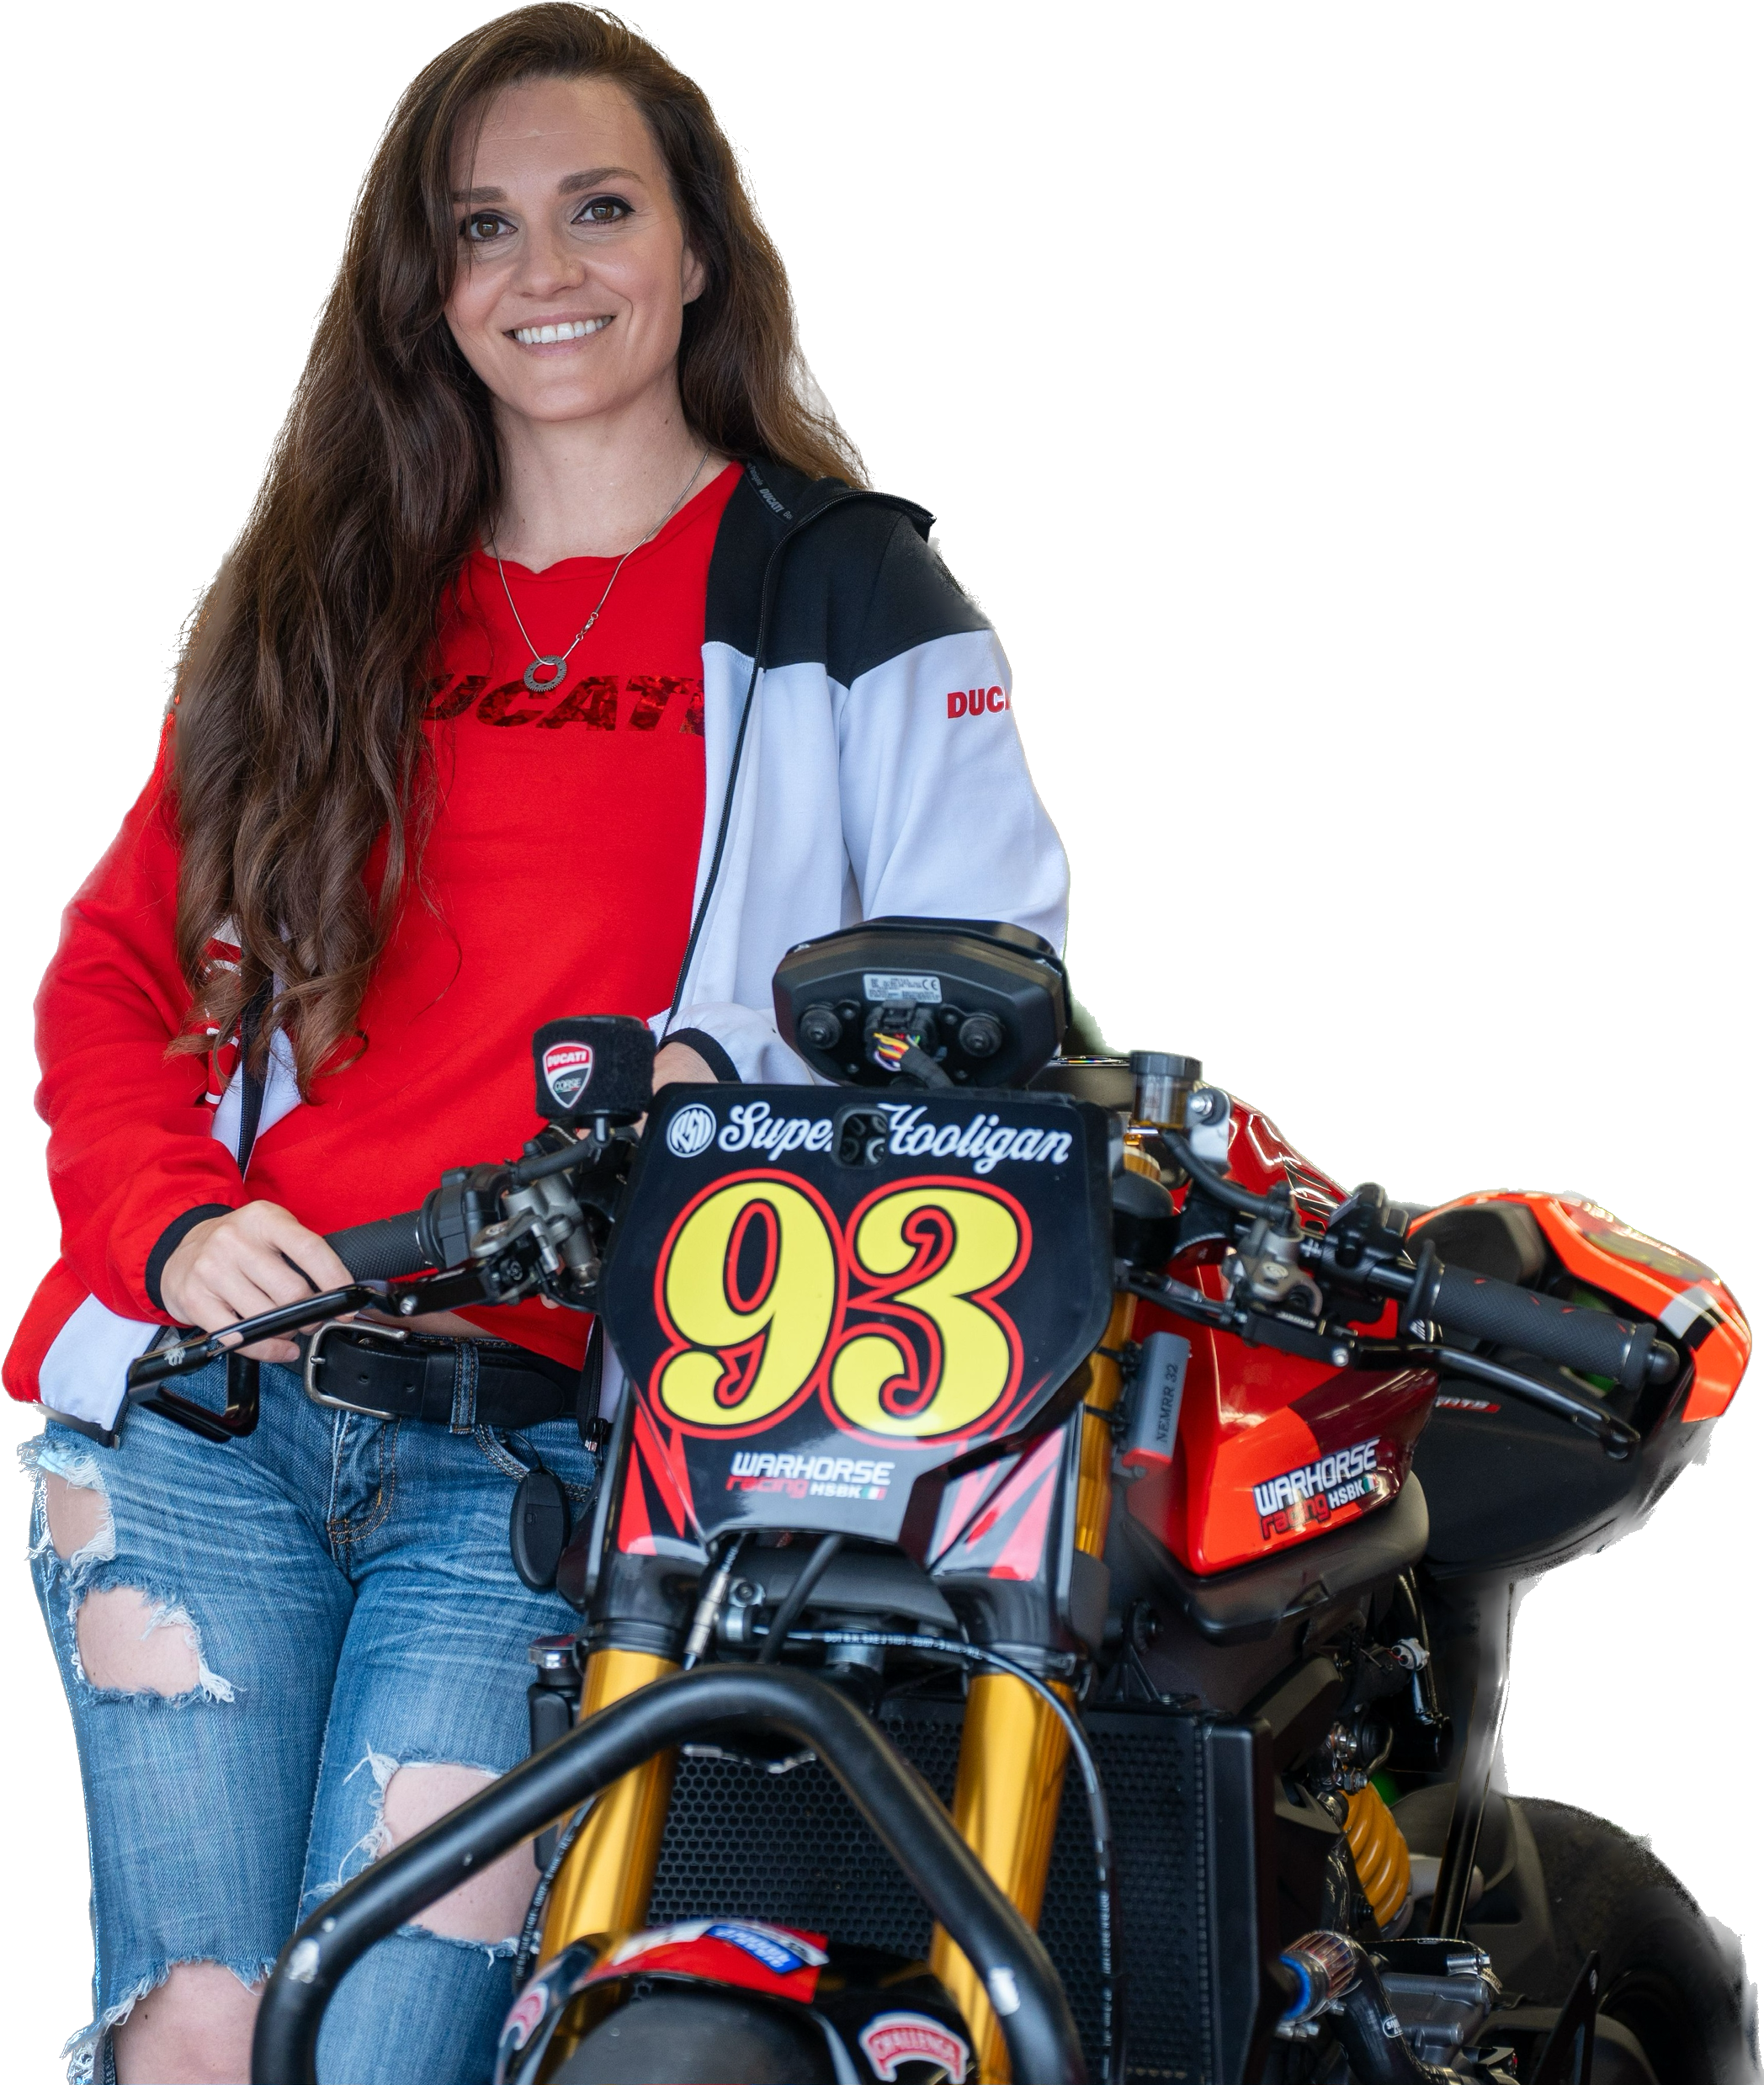 Shelina Moreda standing next to her Ducati Monster SP race motorcycle